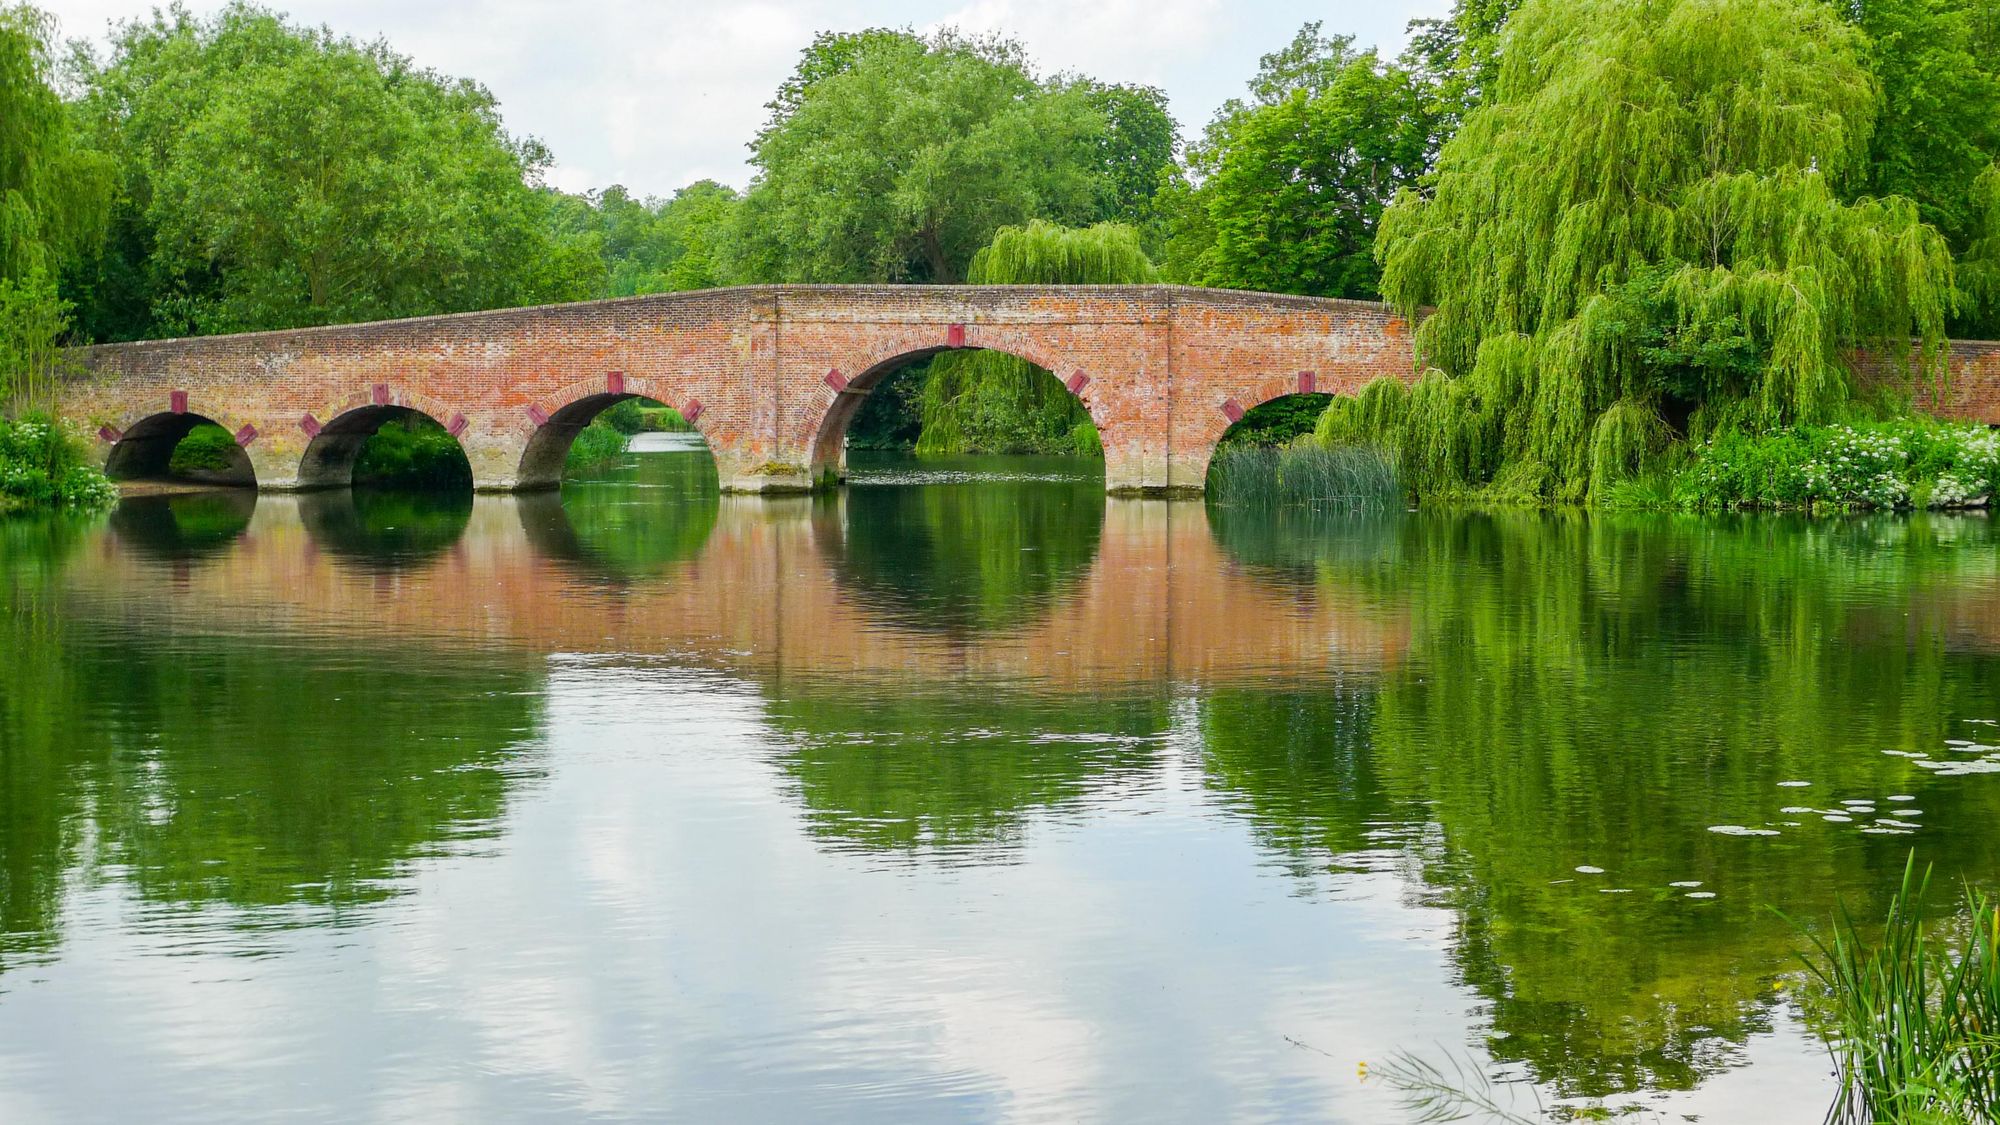 Sonning Bridge over the Thames. Photo: Getty